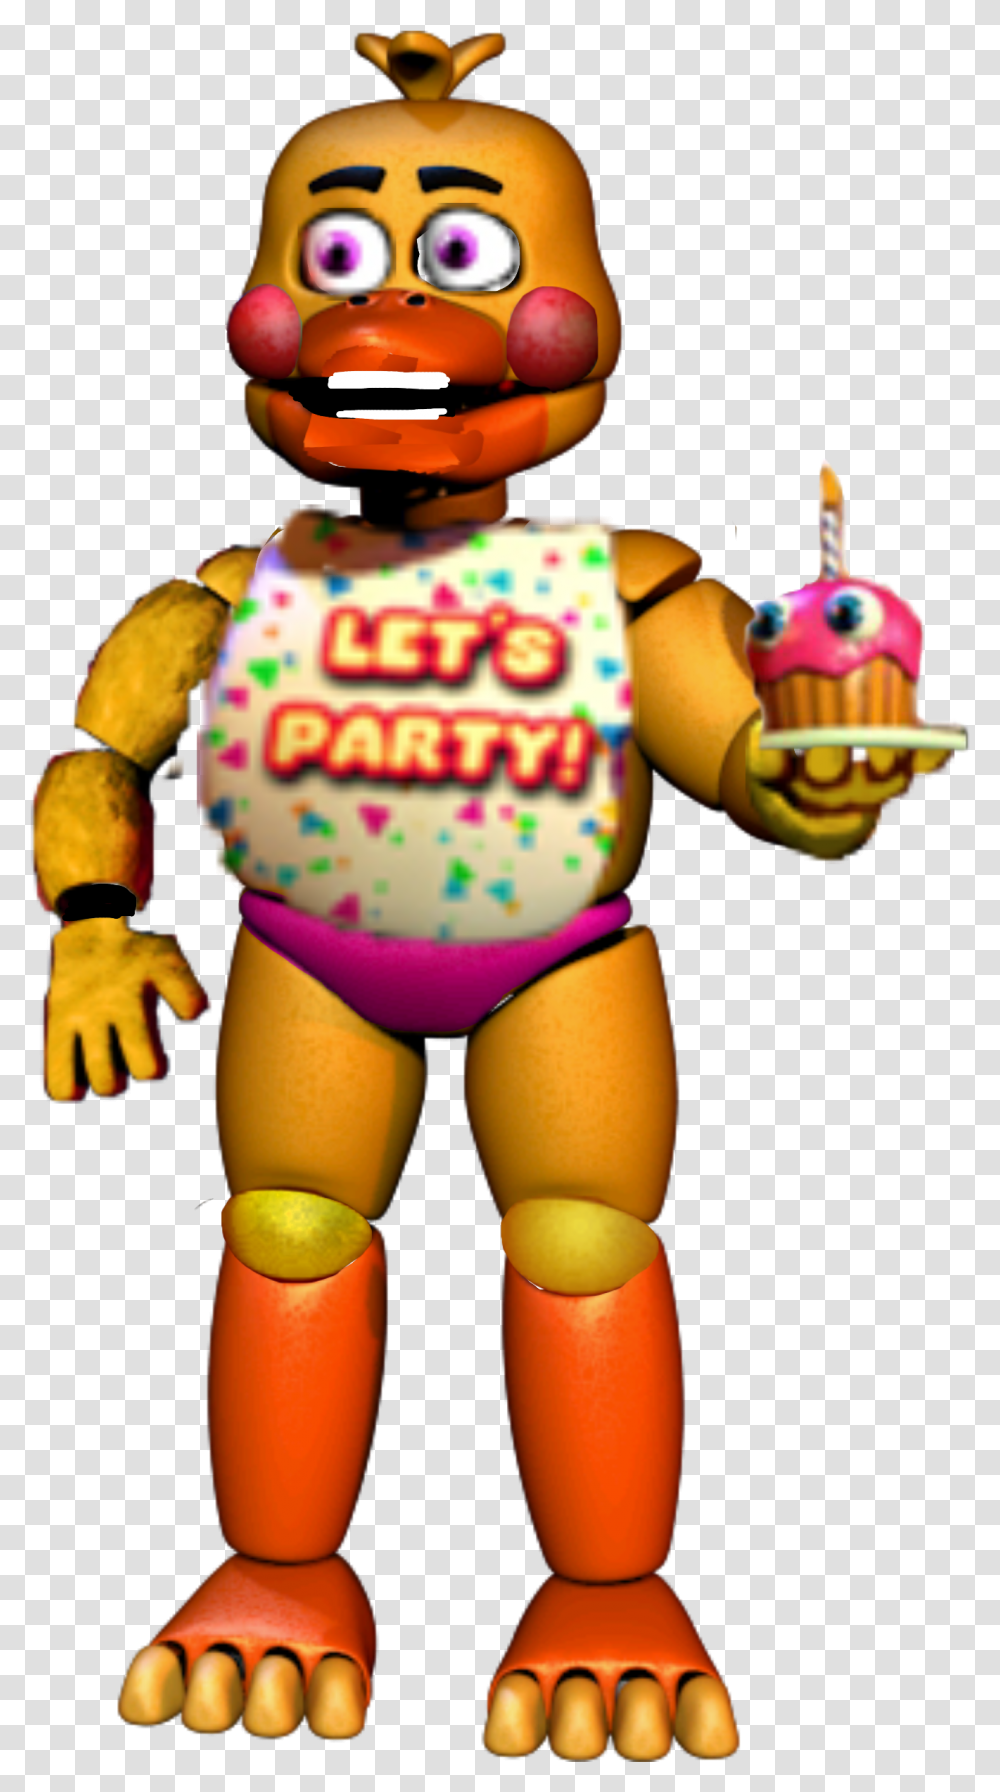 Rockstar Toy Chica Fnaf6 Rockstarchica Chica Toychica Five Nights At Freddy's 6 Rockstar Chica, Figurine Transparent Png